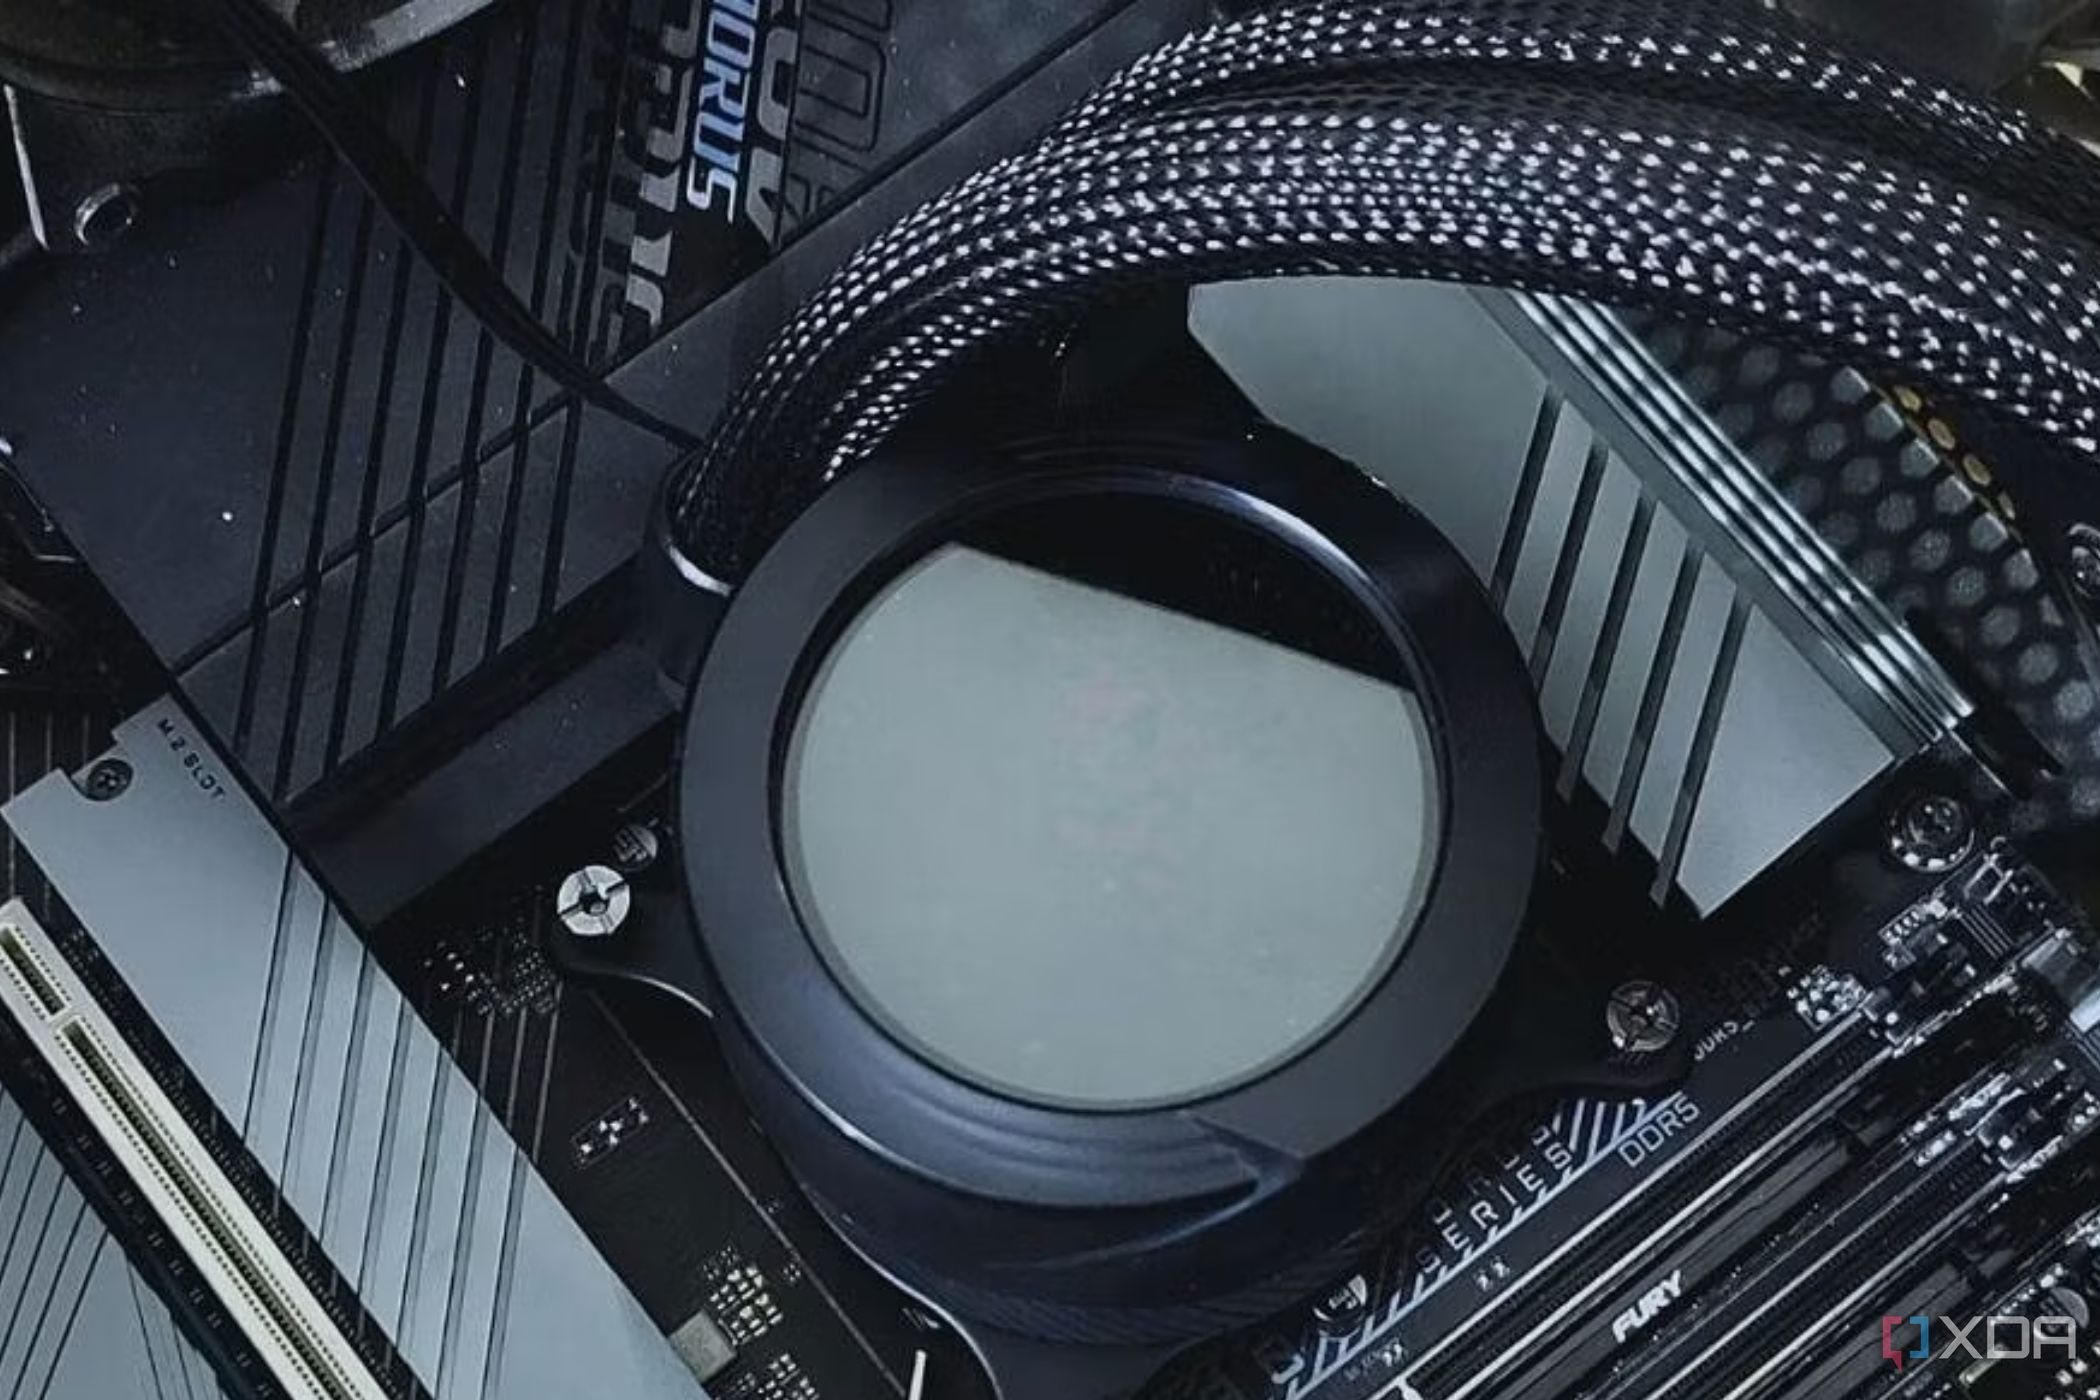 An image showing a liquid cooler waterblock mounted on a motherboard.